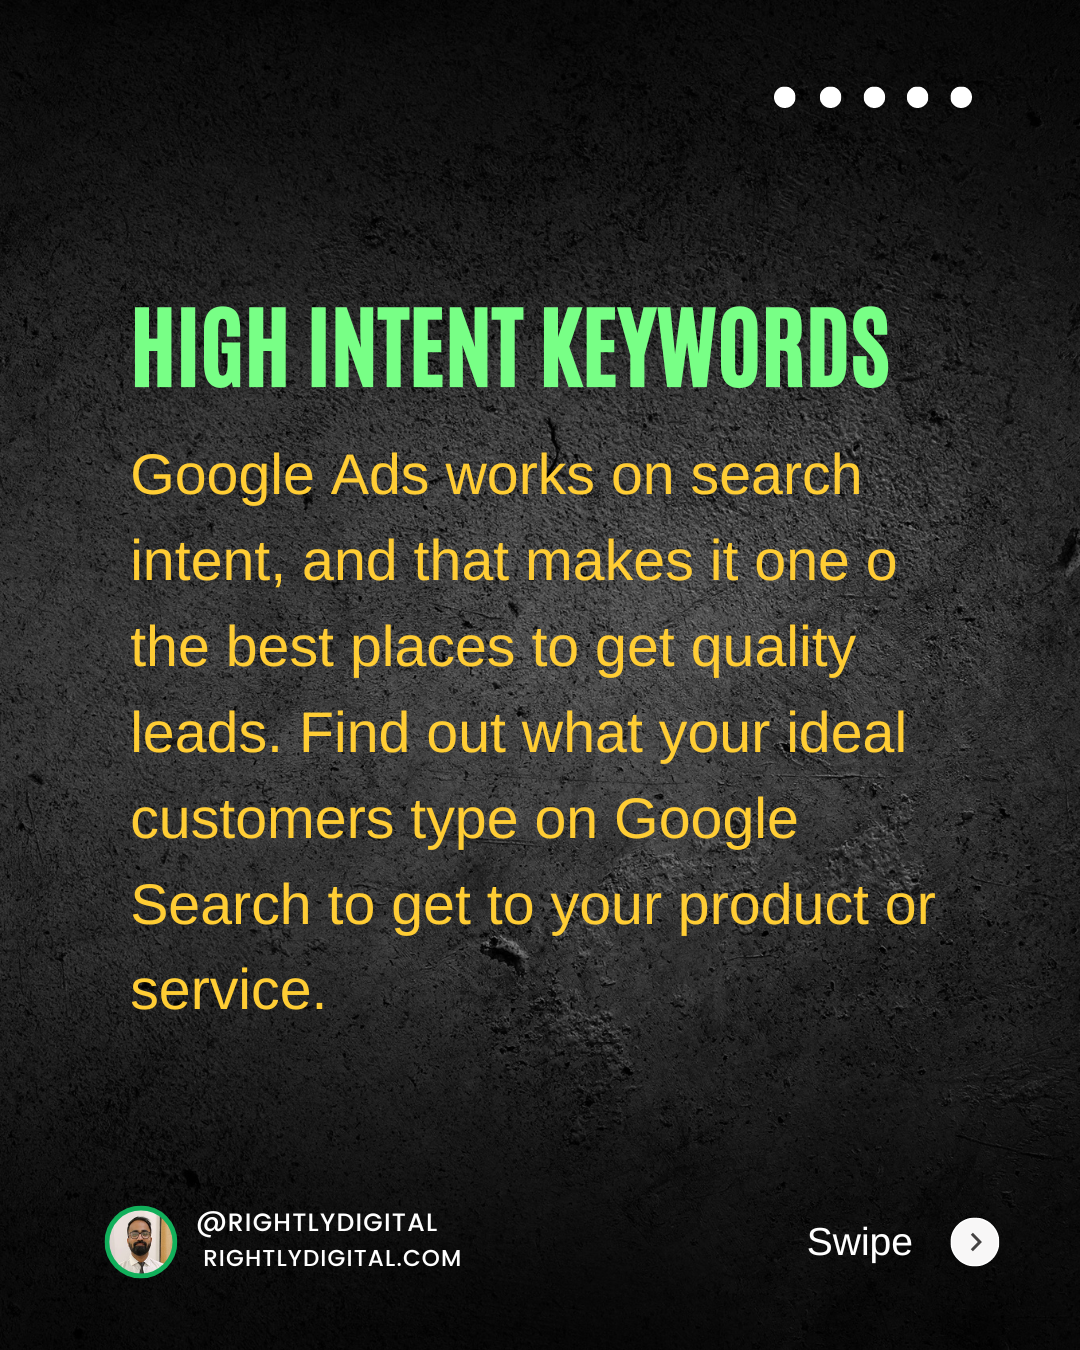 Google Ads works on search intent, and that makes it one o the best places to get quality leads. Find out what your ideal customers type on Google Search to get to